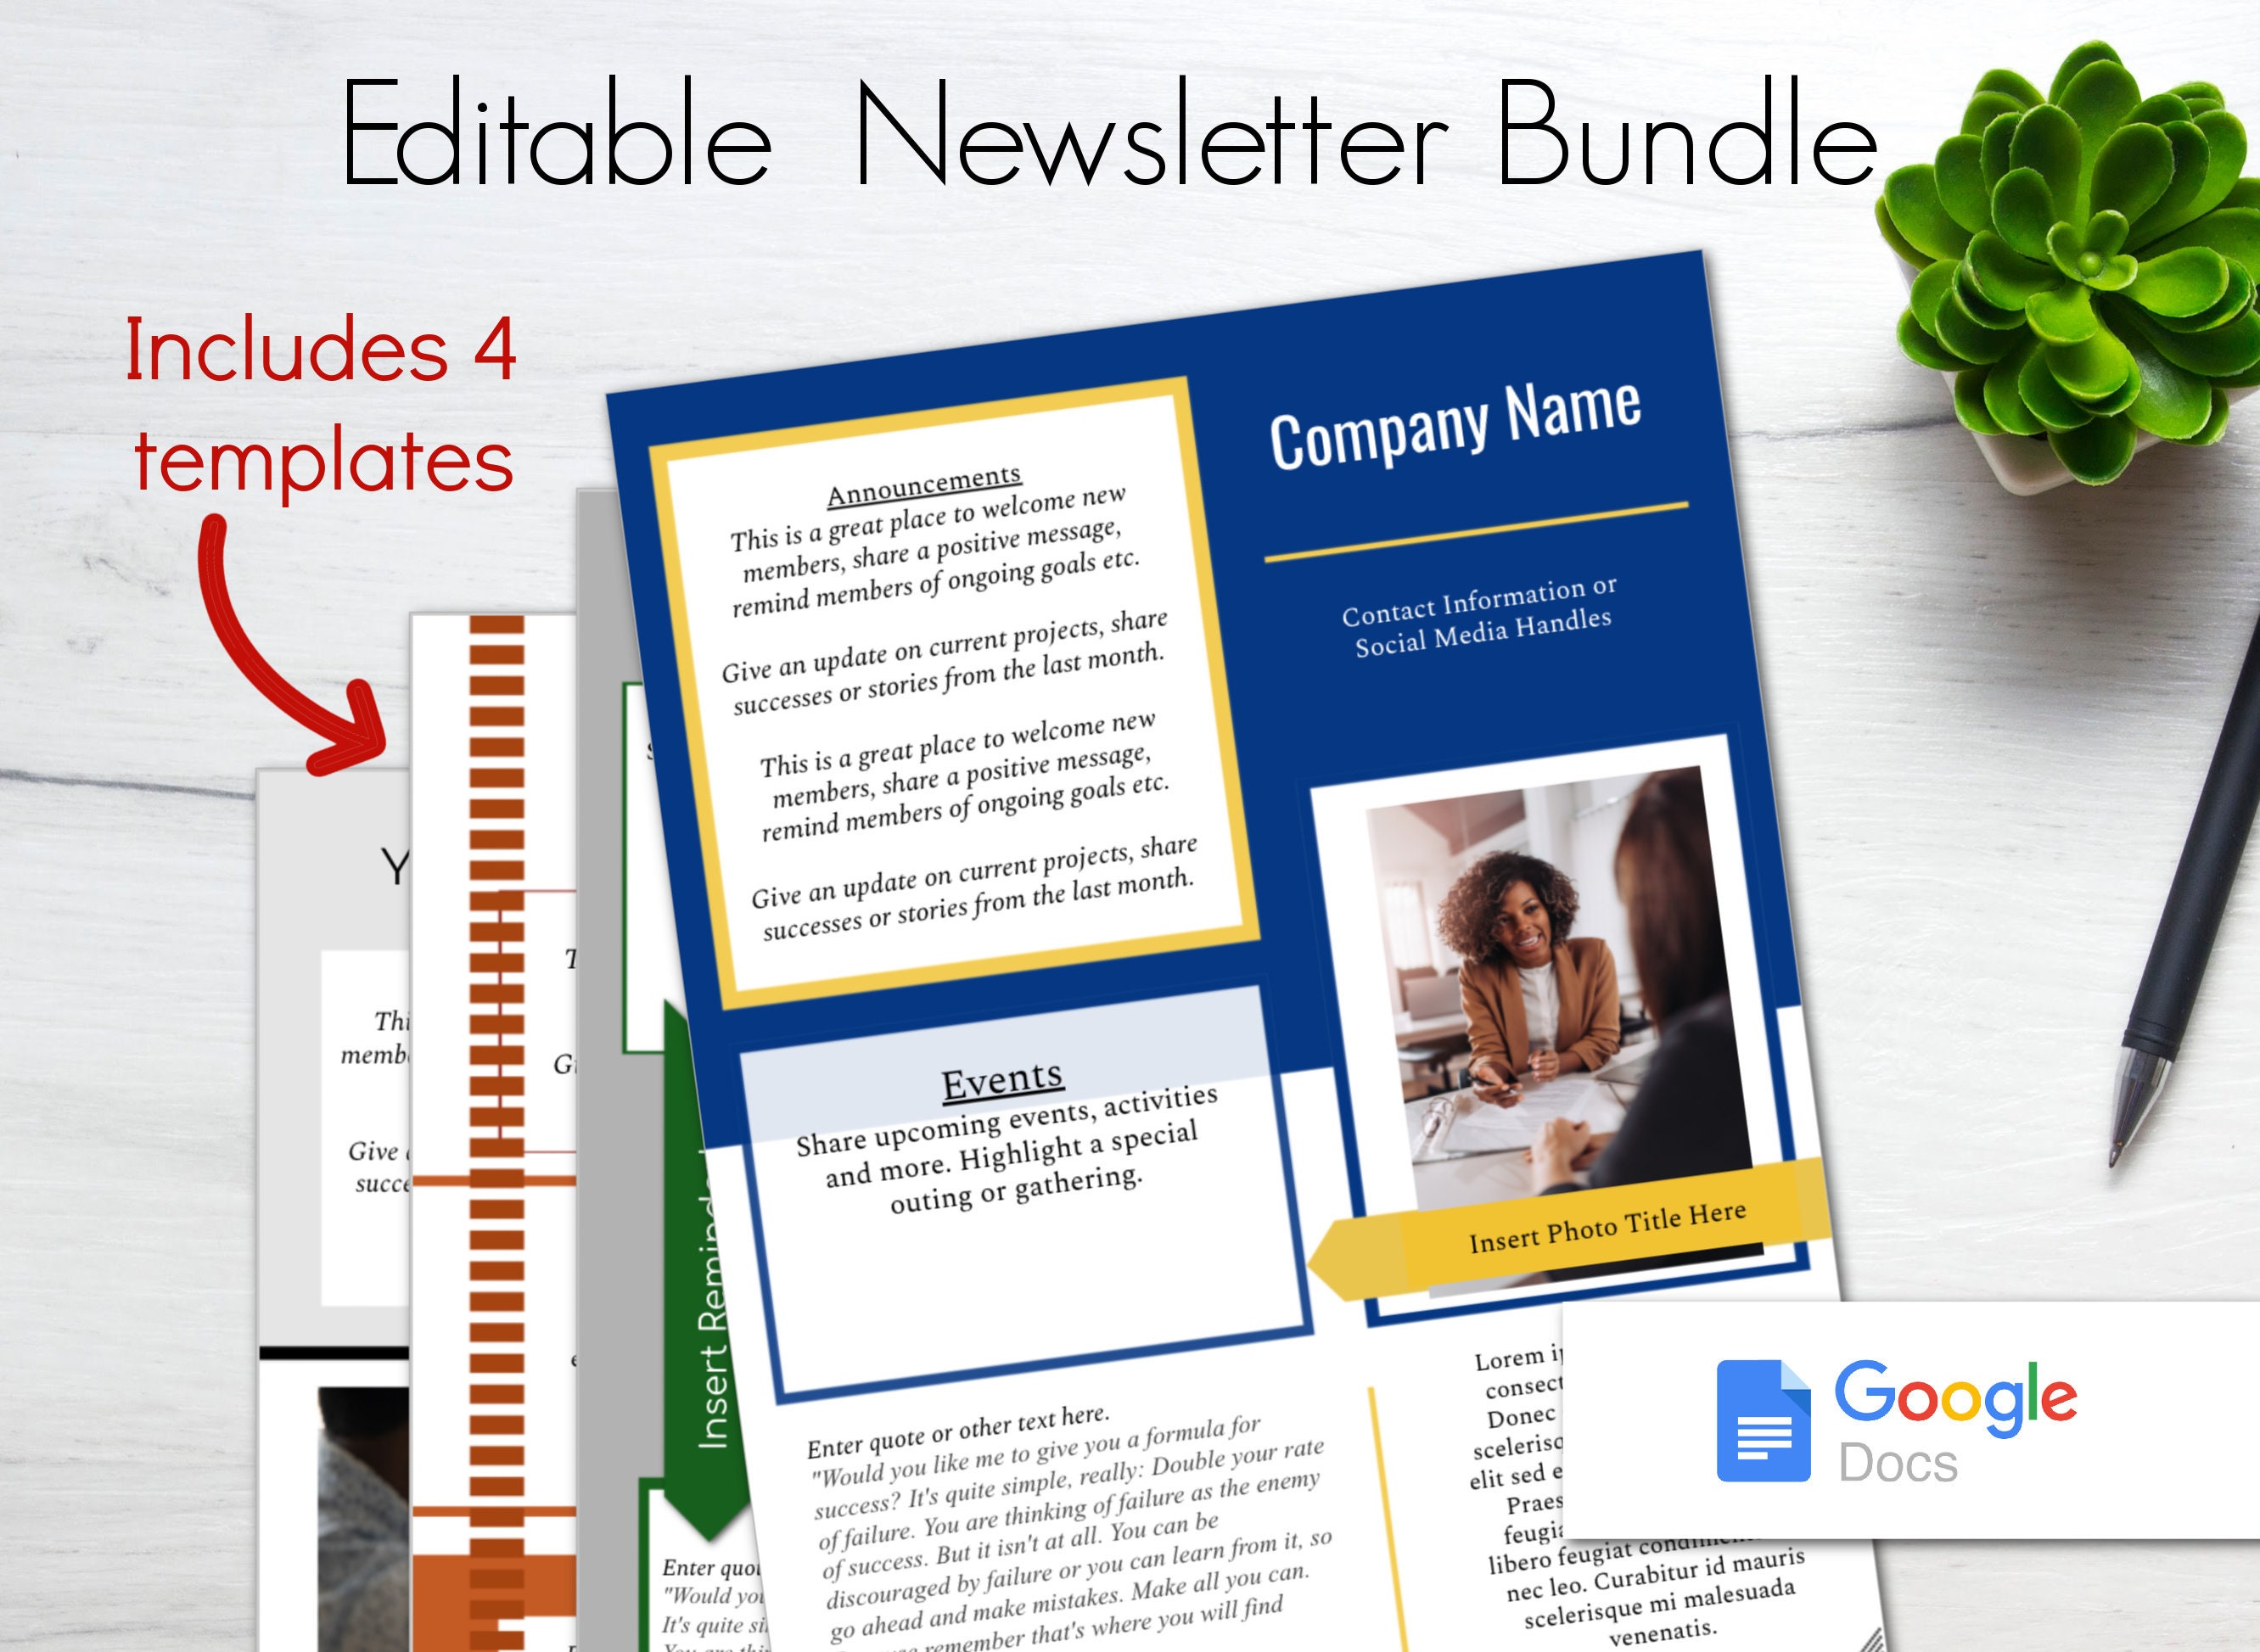 What are Editable Newsletter Templates & Where to Find Them?